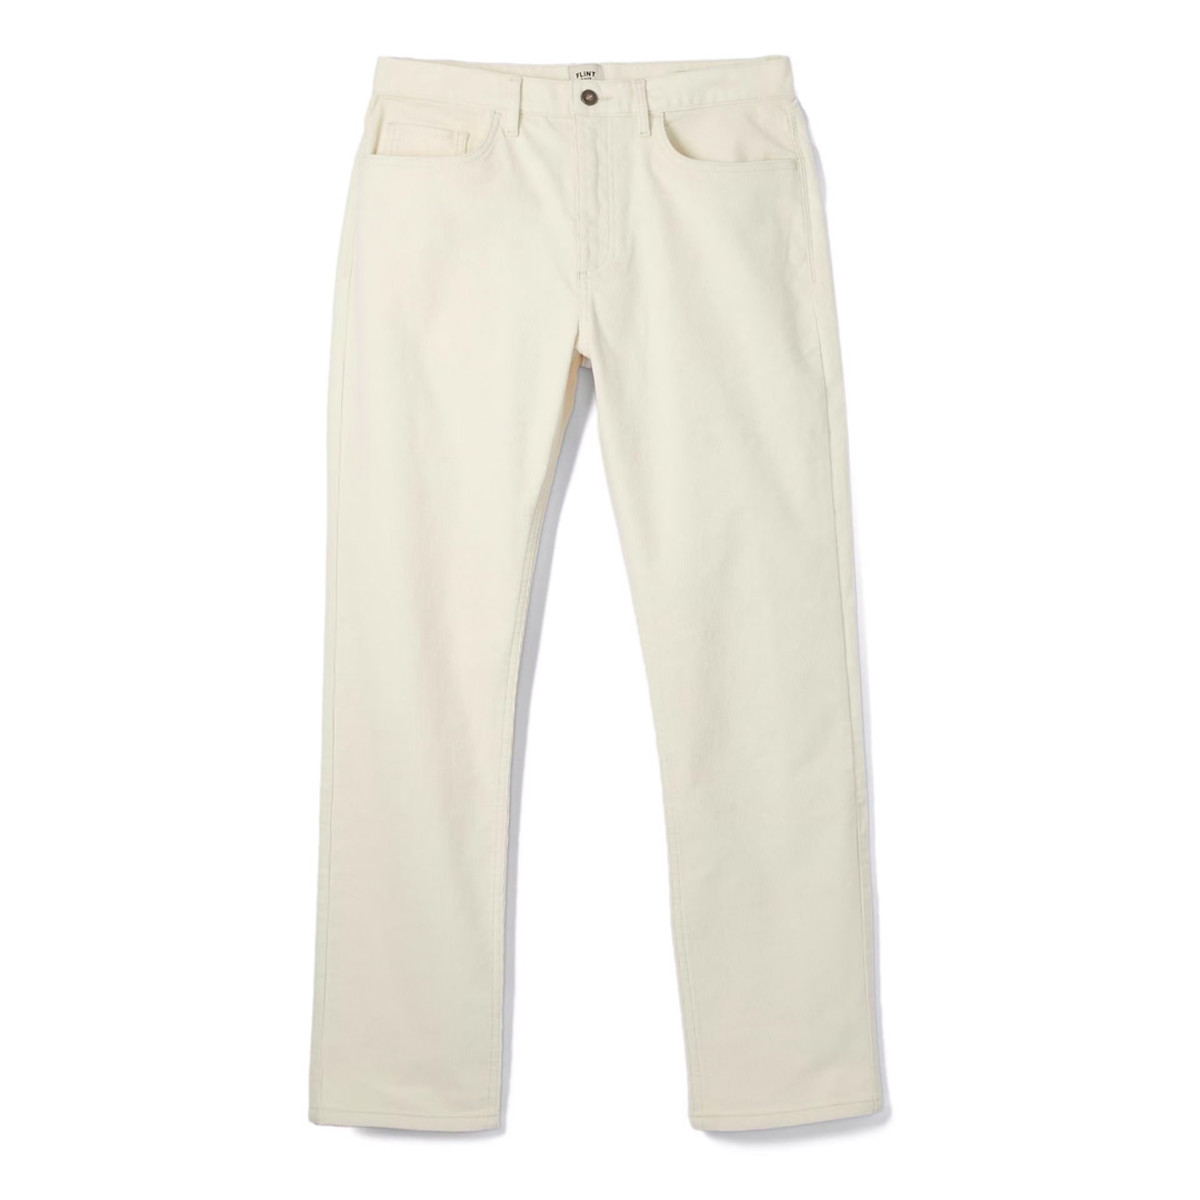 Flint and Tinder 365 Corduroy Pant - Athletic Tapered - Earth, Casual Pants